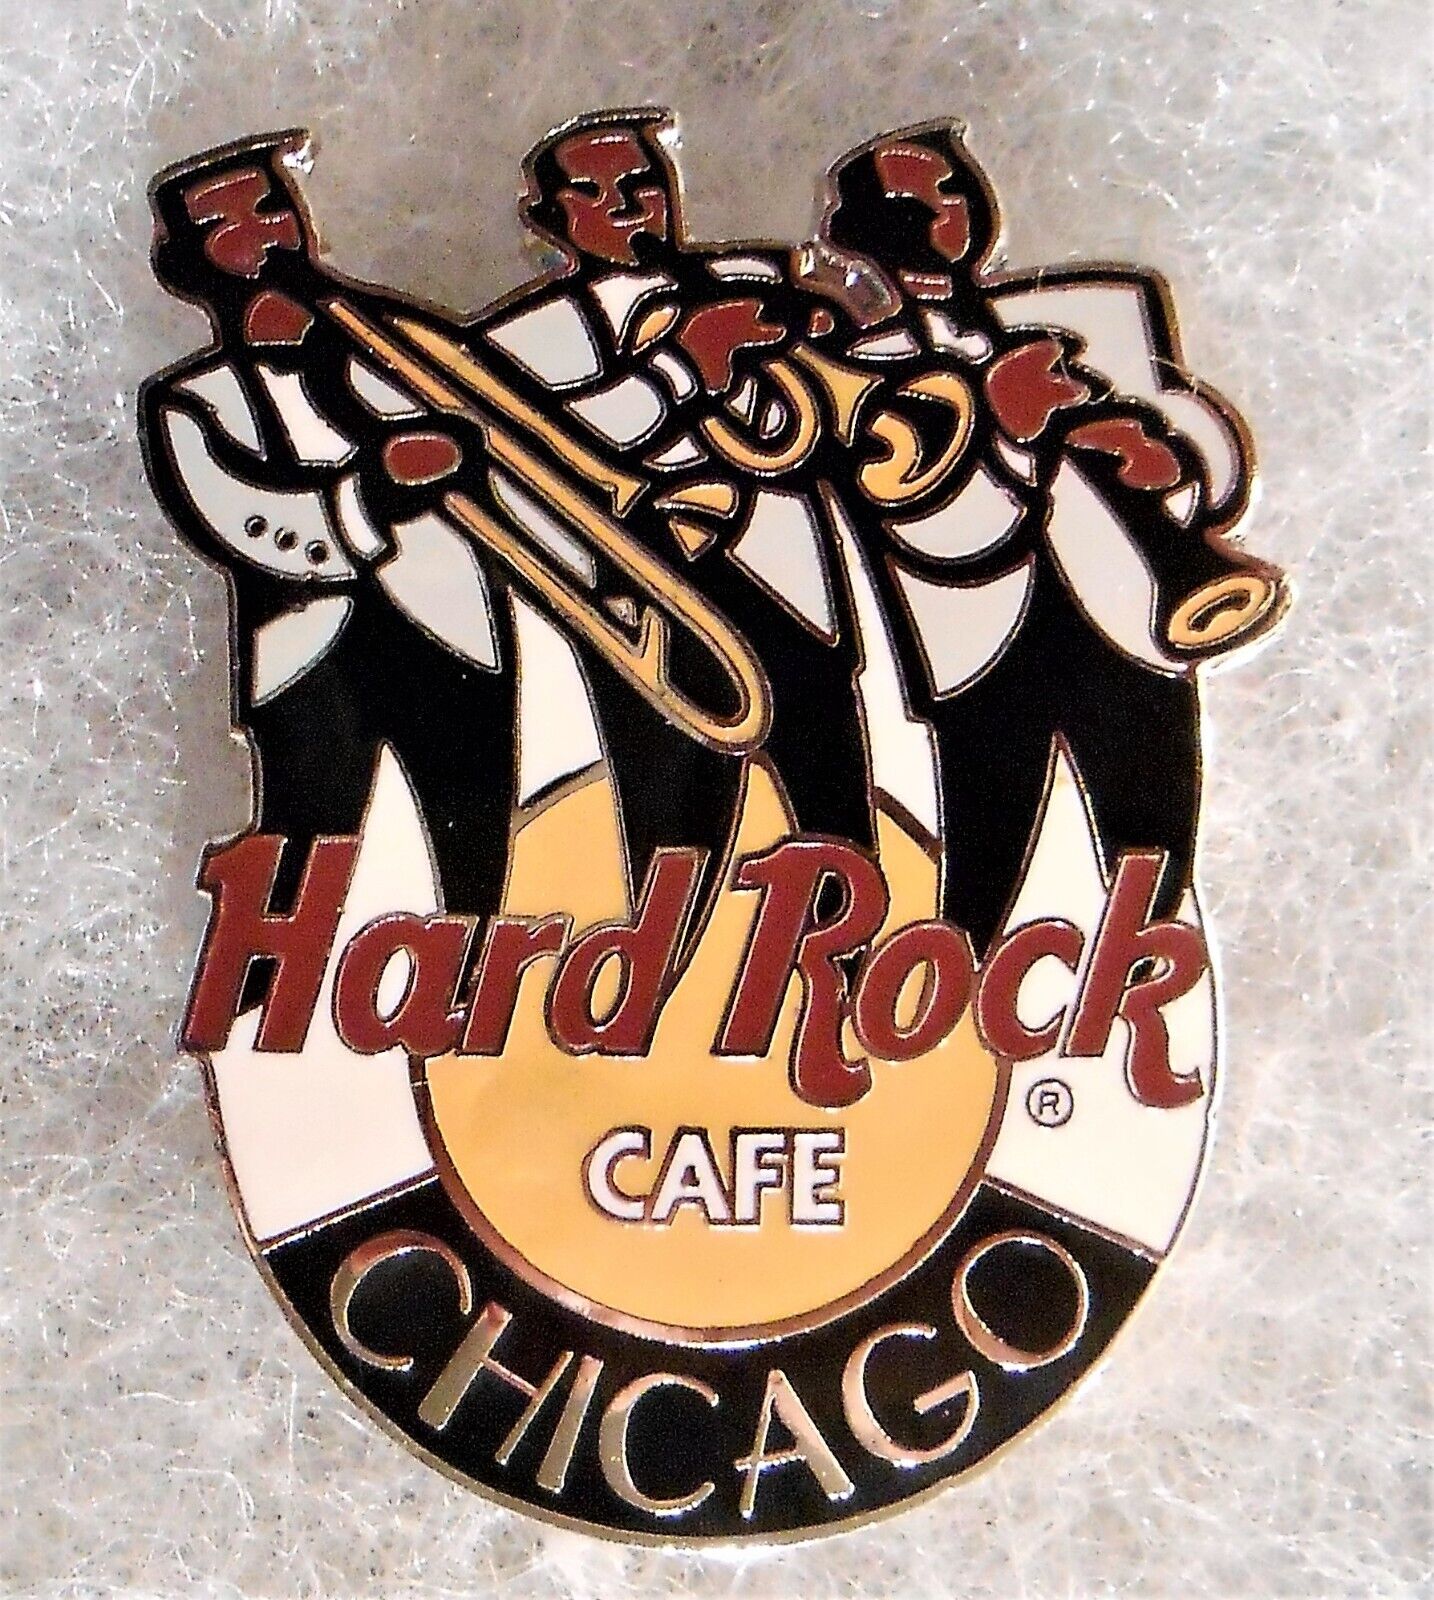 HARD ROCK CAFE CHICAGO JAZZ BAND TRIO PLAYING INSTRUMENTS PIN # 1802